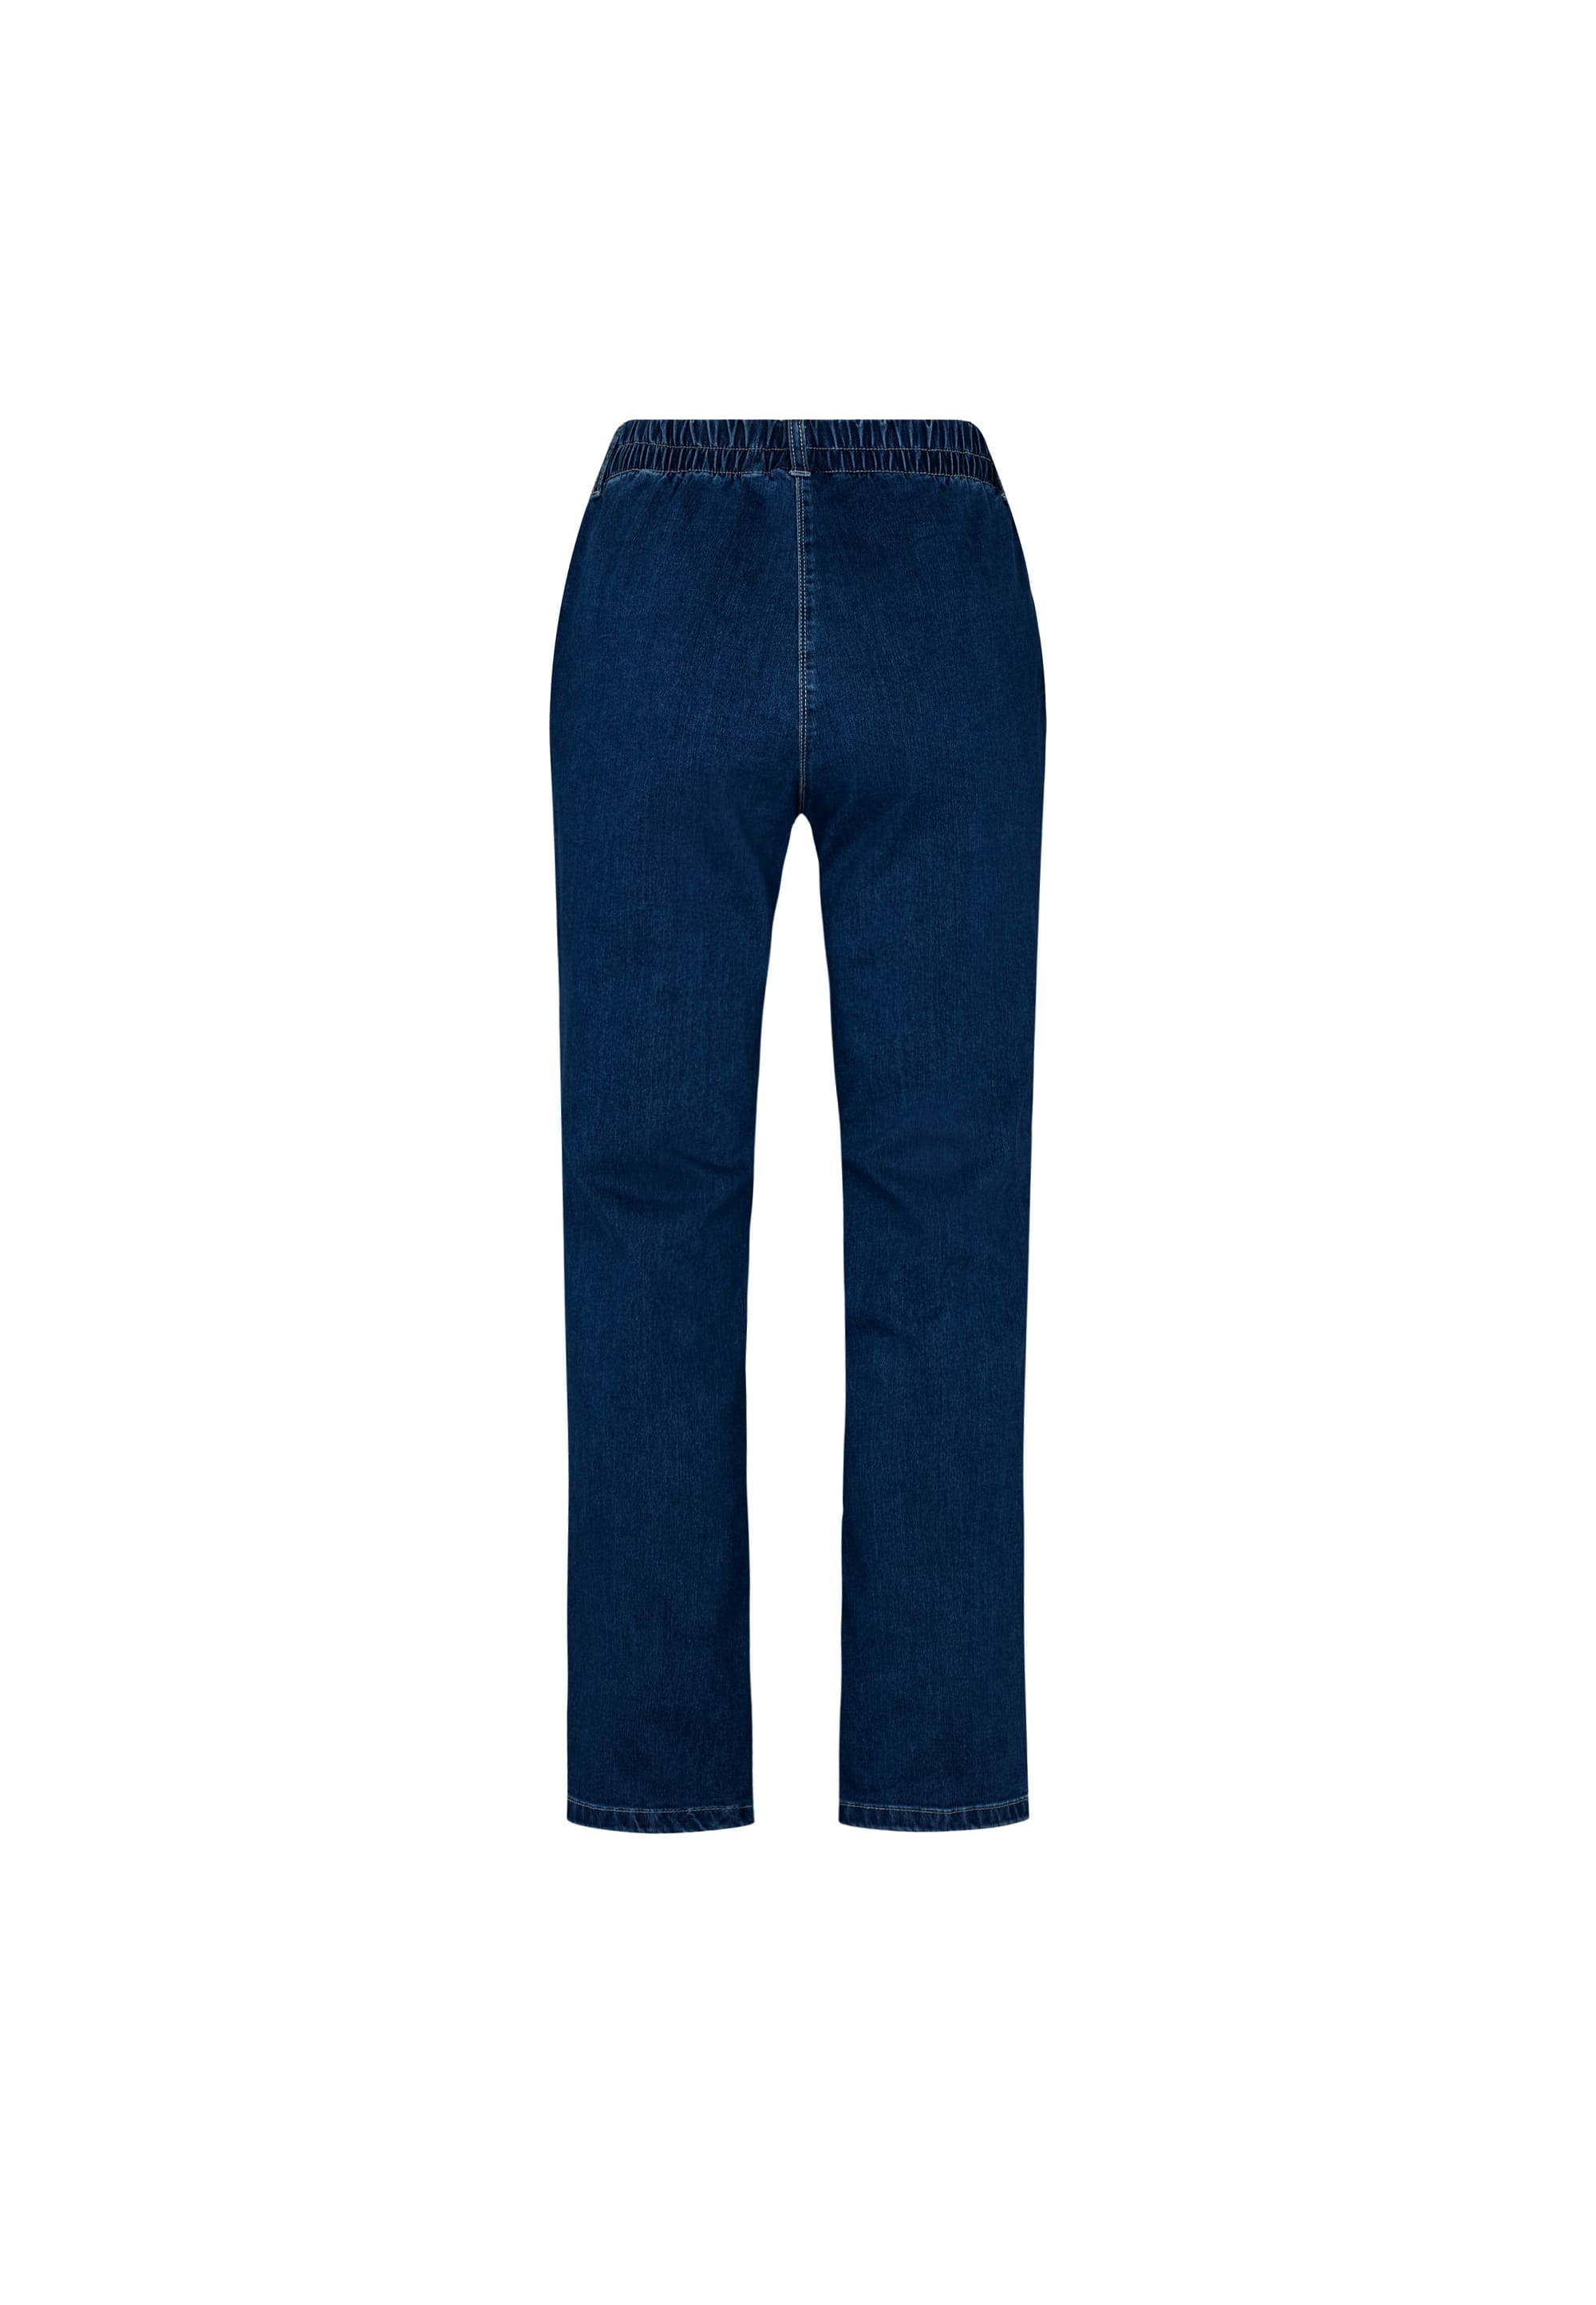 LAURIE  Violet Relaxed - Medium Length Trousers RELAXED 49501 Dark Blue Denim